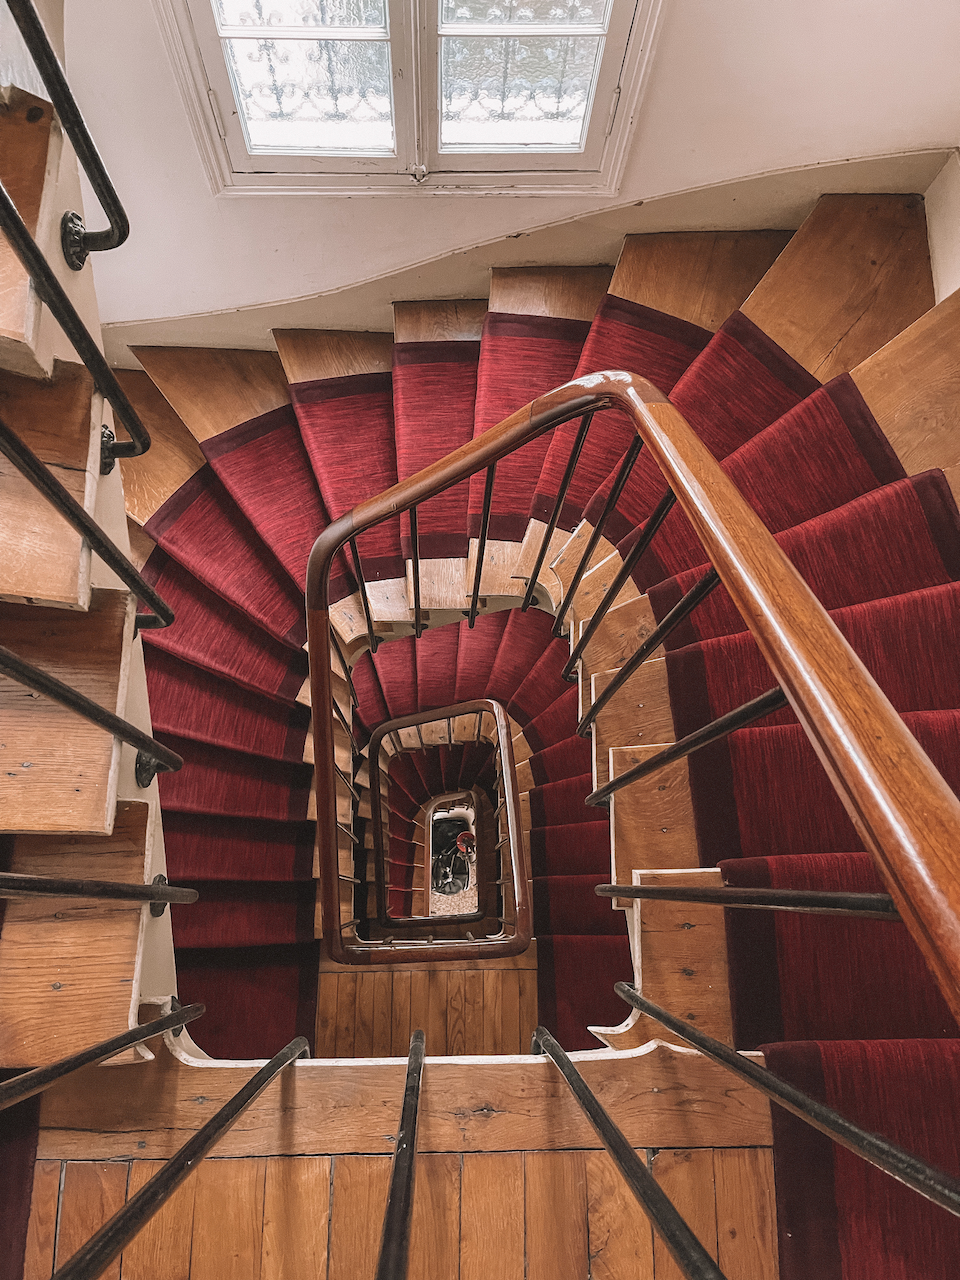 Traditional Parisian staircase in residential building with red carpet - Paris - France